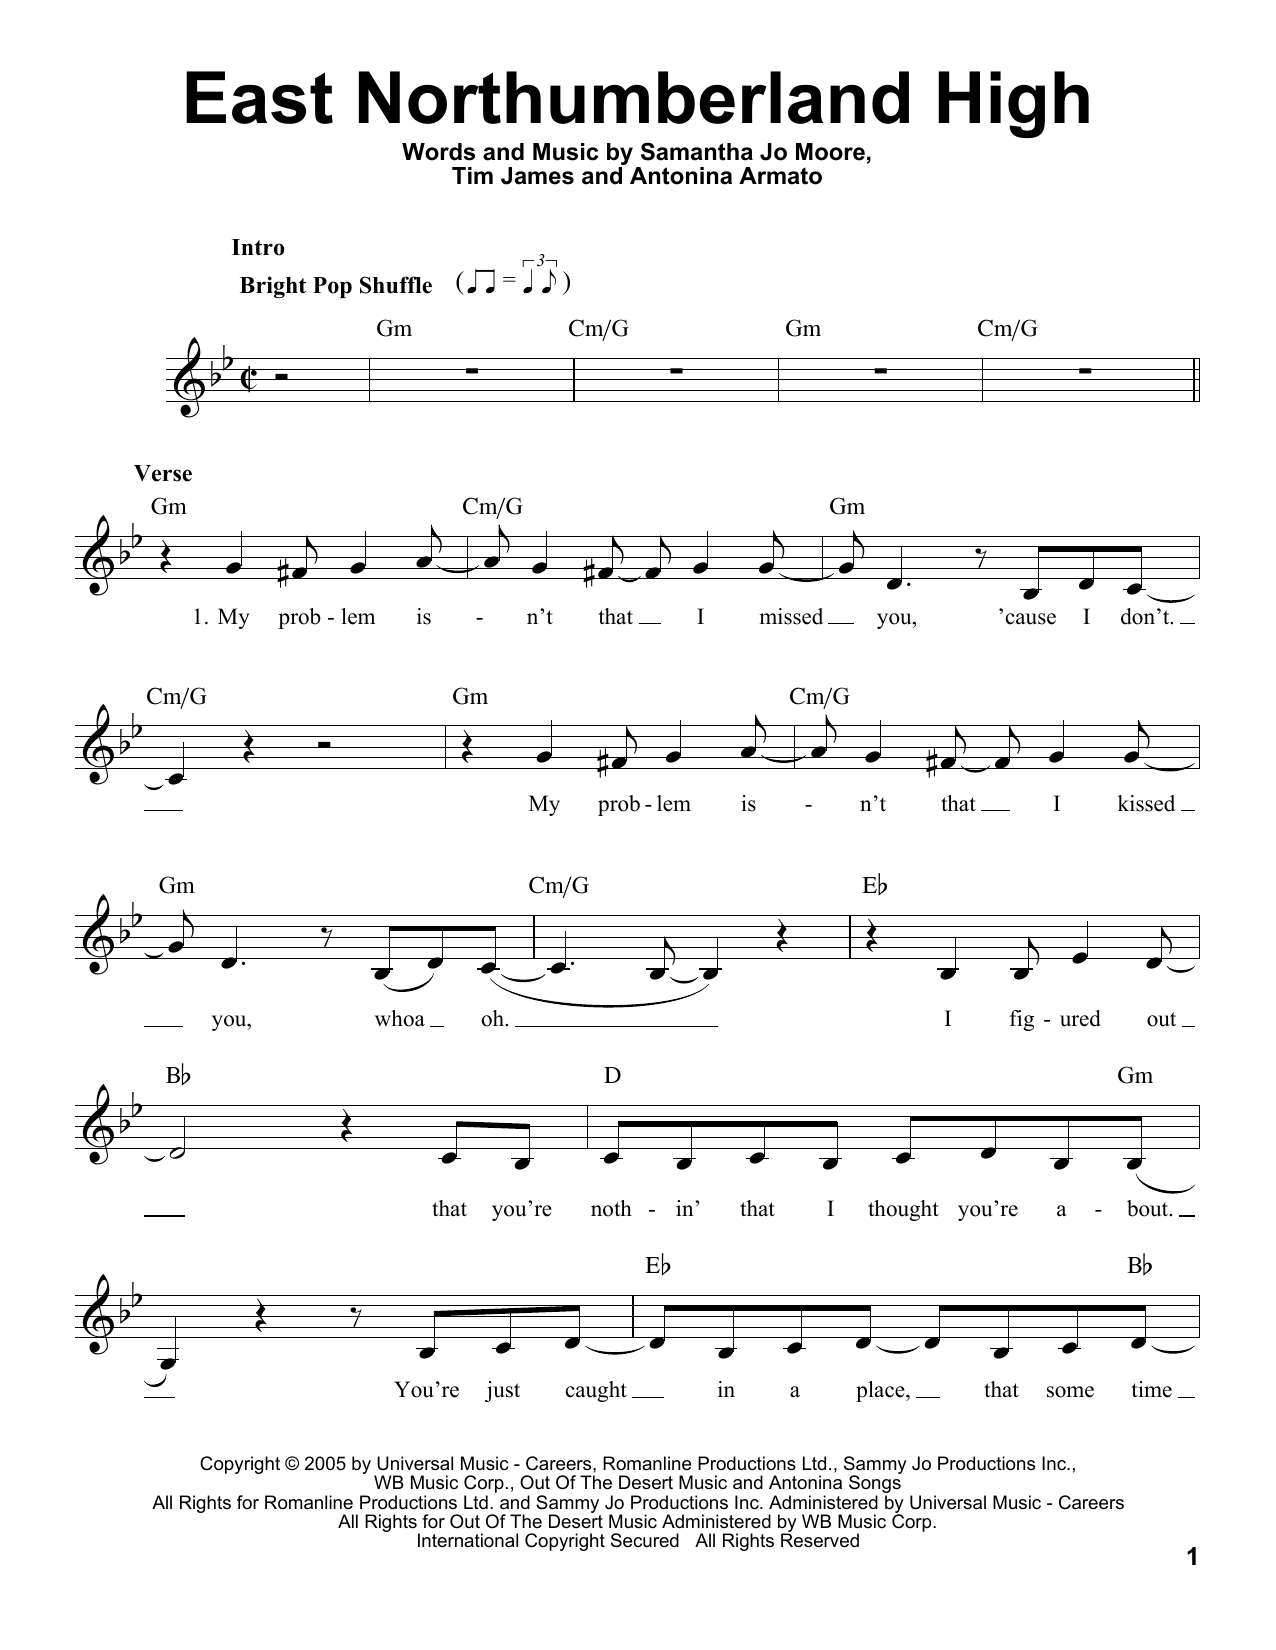 Download Miley Cyrus East Northumberland High Sheet Music